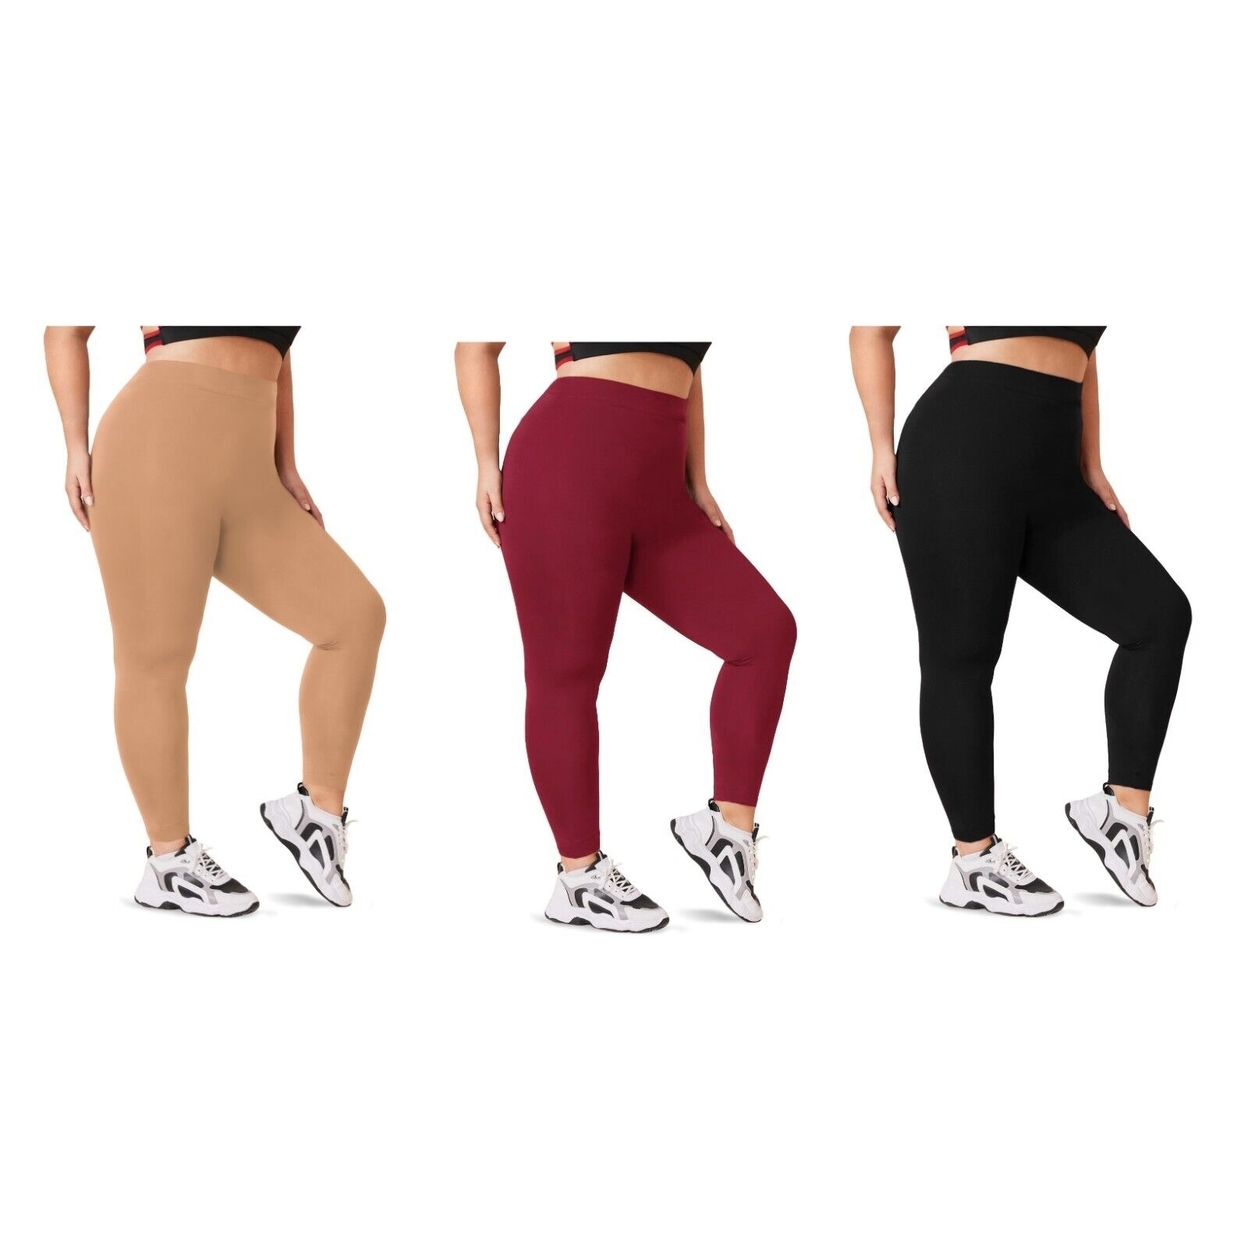 2-Pack: Women's Casual Ultra-Soft Smooth High Waisted Athletic Active Yoga Leggings Plus Size Available - Beige & Red, 3x